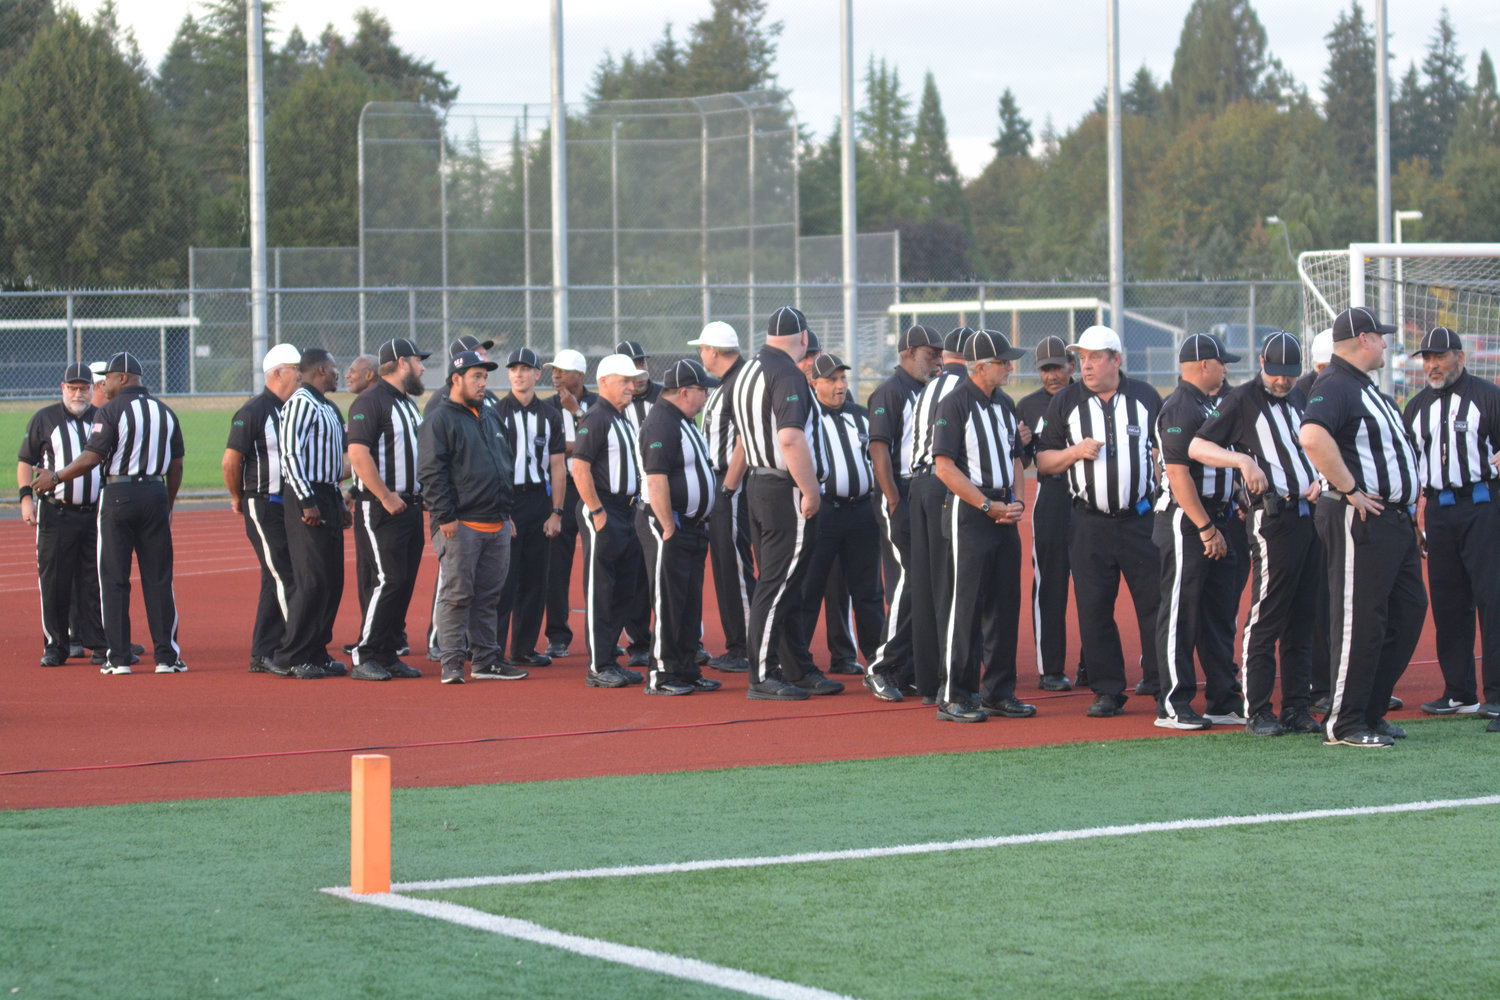 Referees gather prior to the celebration of life for Mike Kain on Sept. 29.